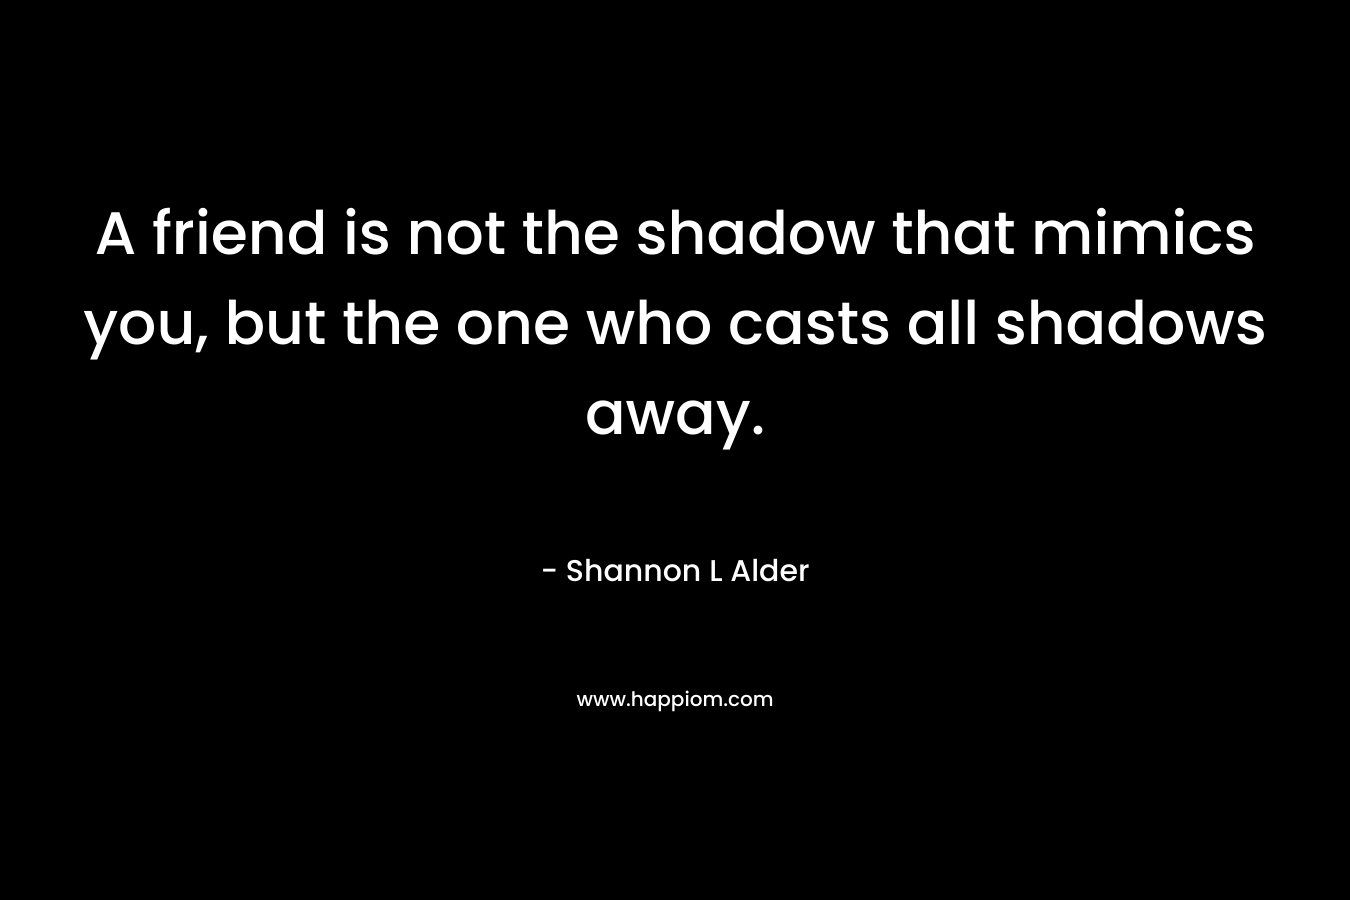 A friend is not the shadow that mimics you, but the one who casts all shadows away. – Shannon L Alder